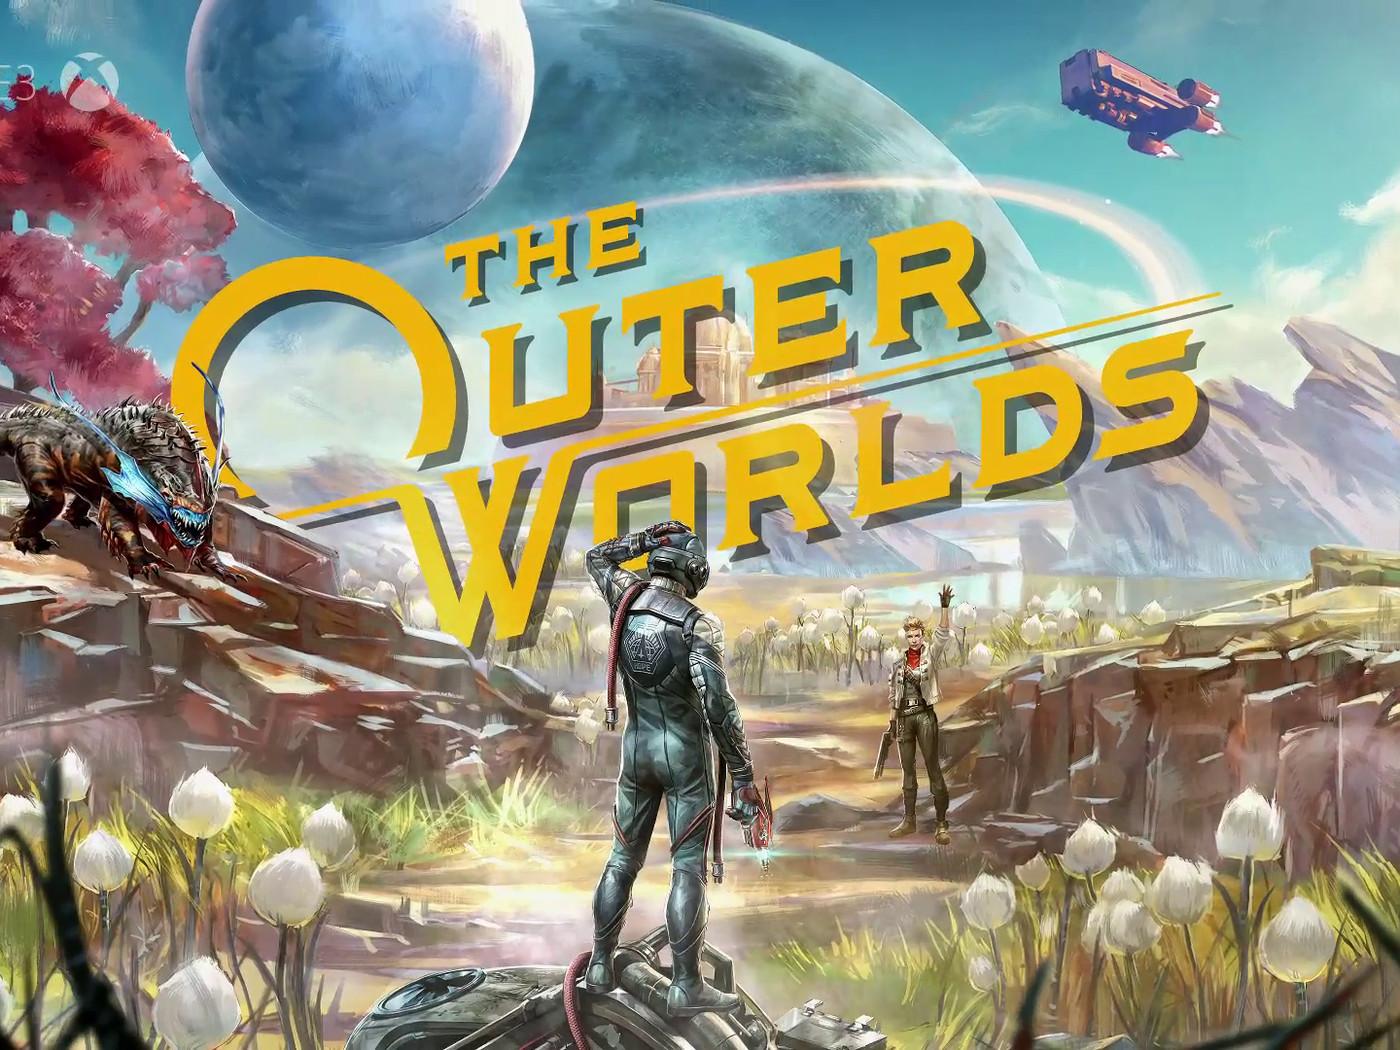 The Outer Worlds is out in October, watch its new E3 2019